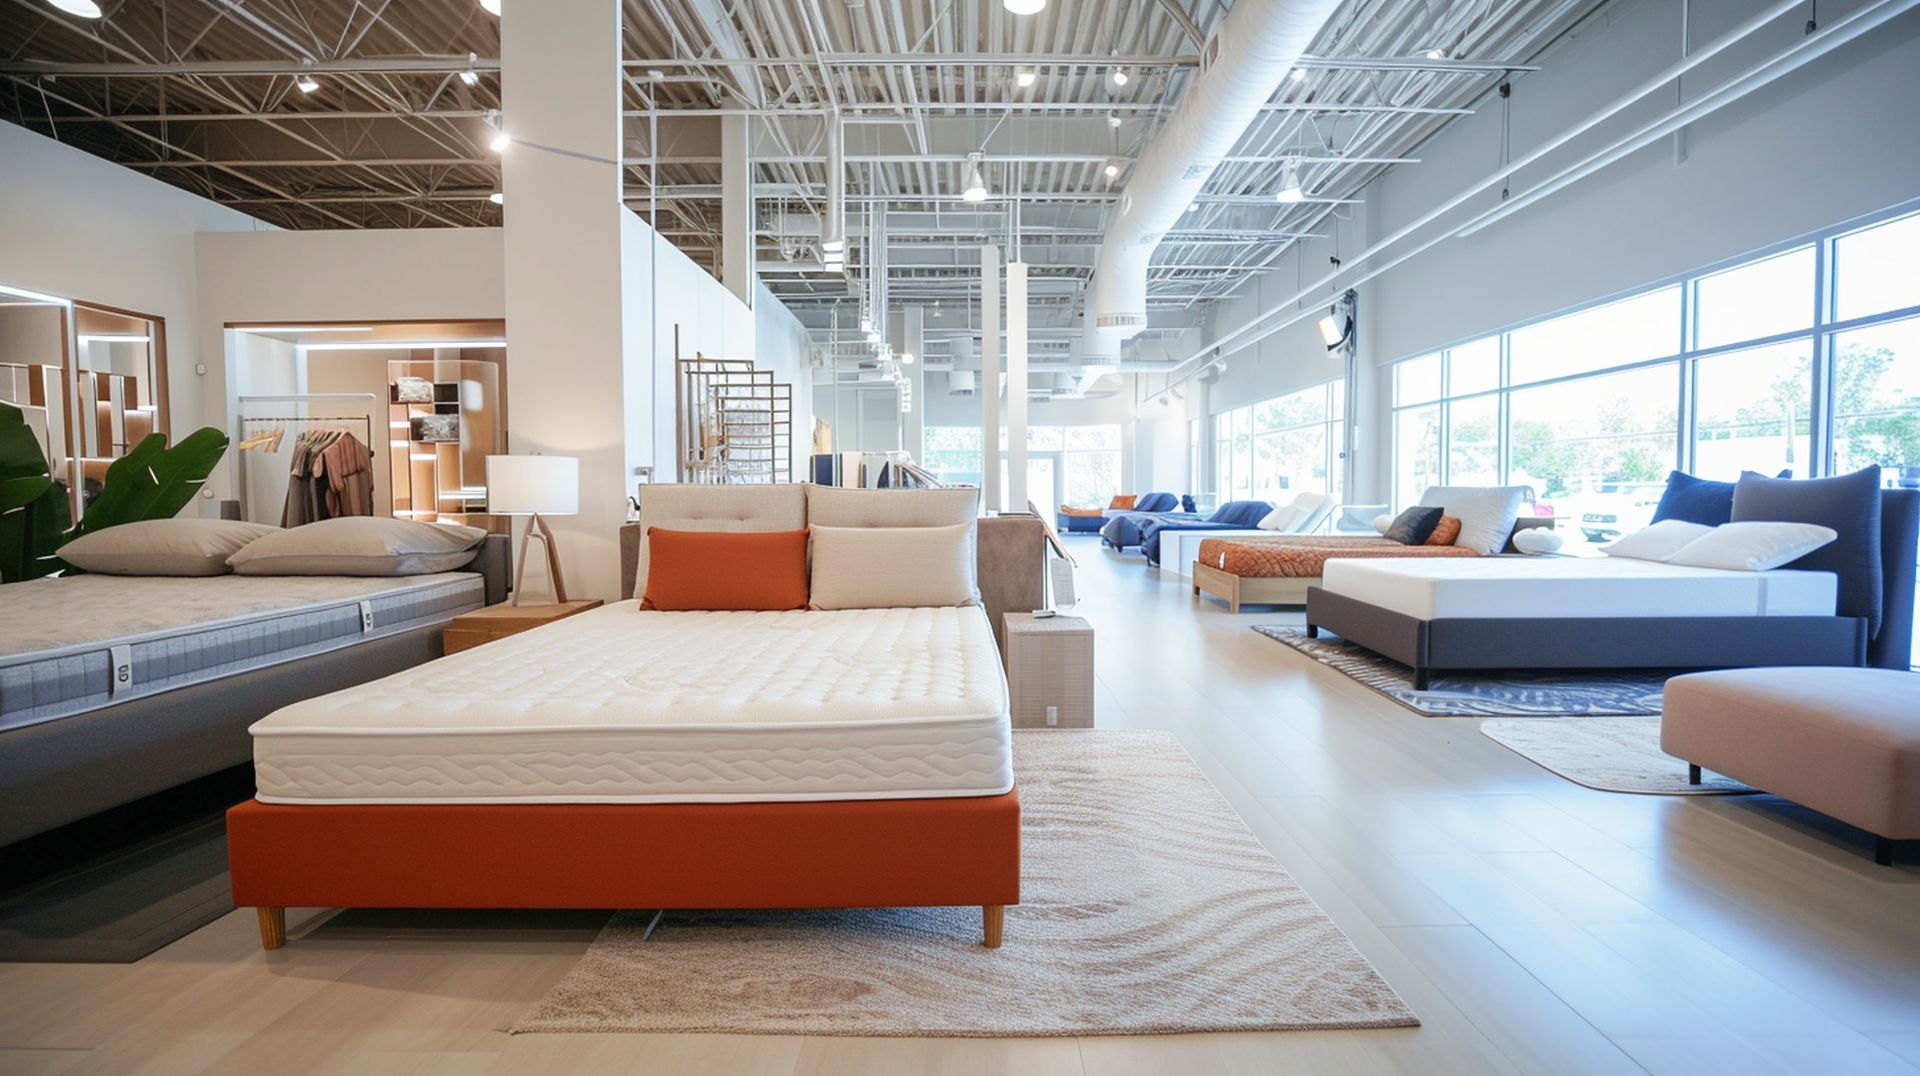 If you're looking for a new bed, mattress stores in Bloomington offer the best customer and delivery service, financing, and warranties in Indiana